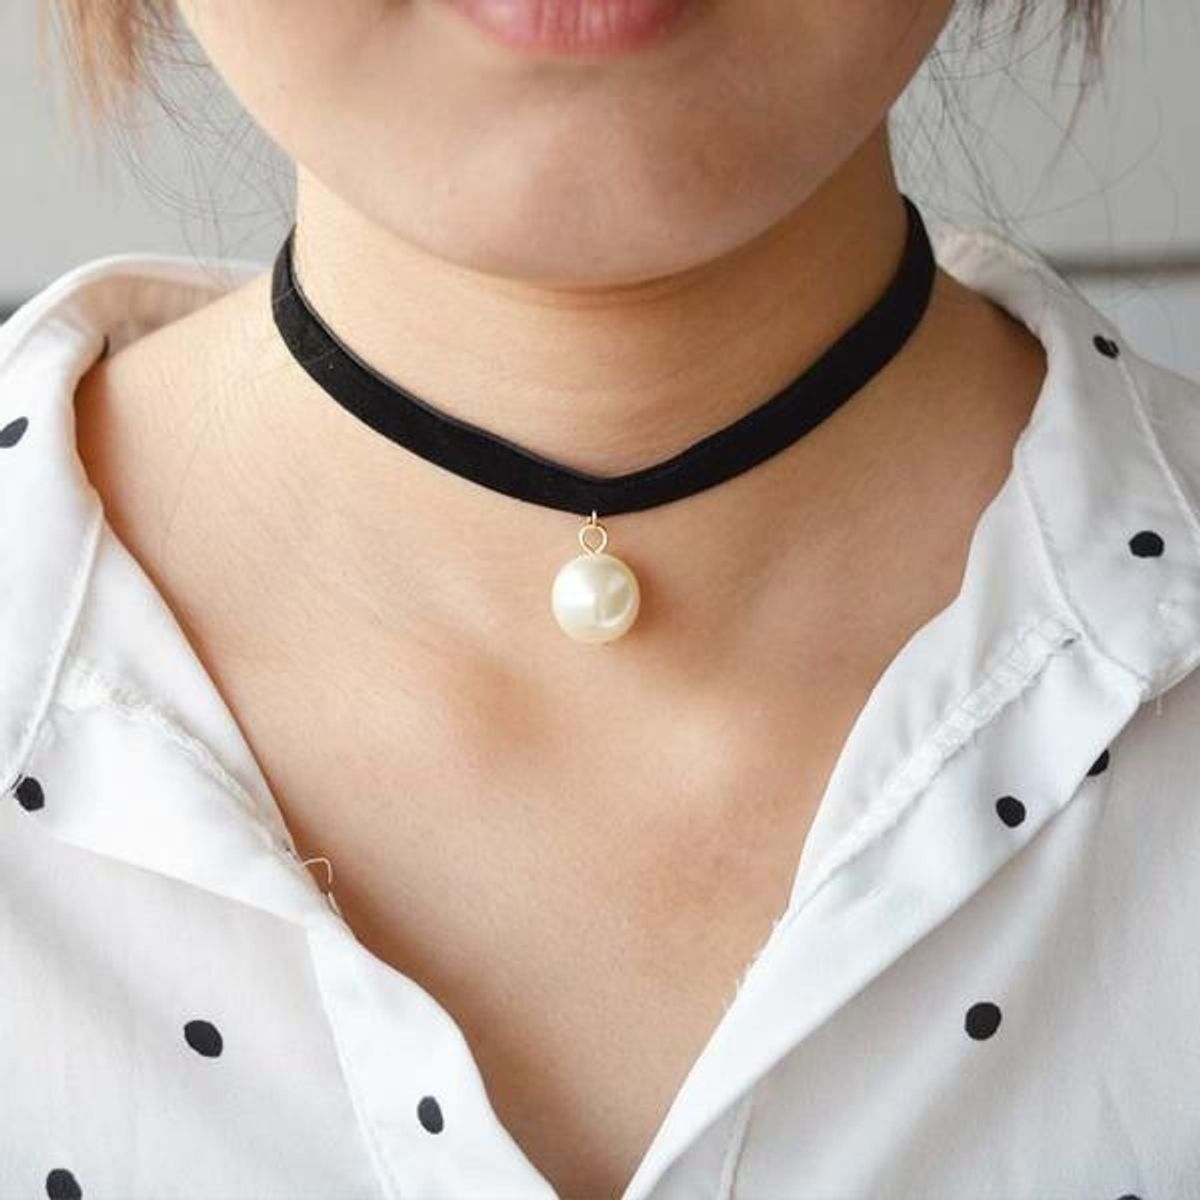 What Your Choker Style Says About You